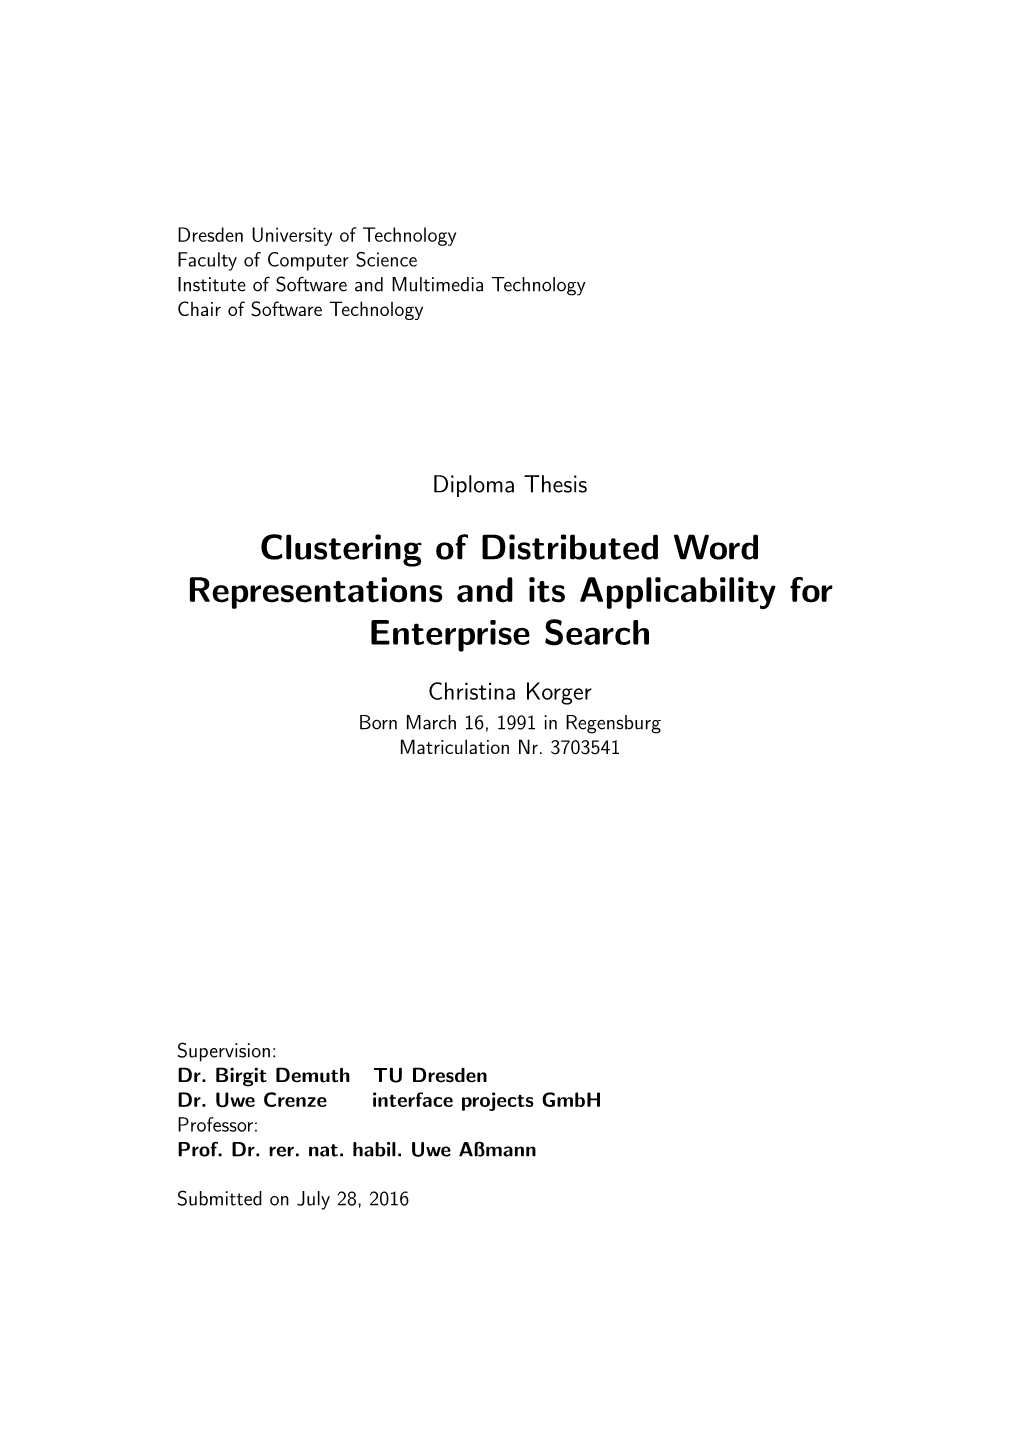 Clustering of Distributed Word Representations and Its Applicability for Enterprise Search